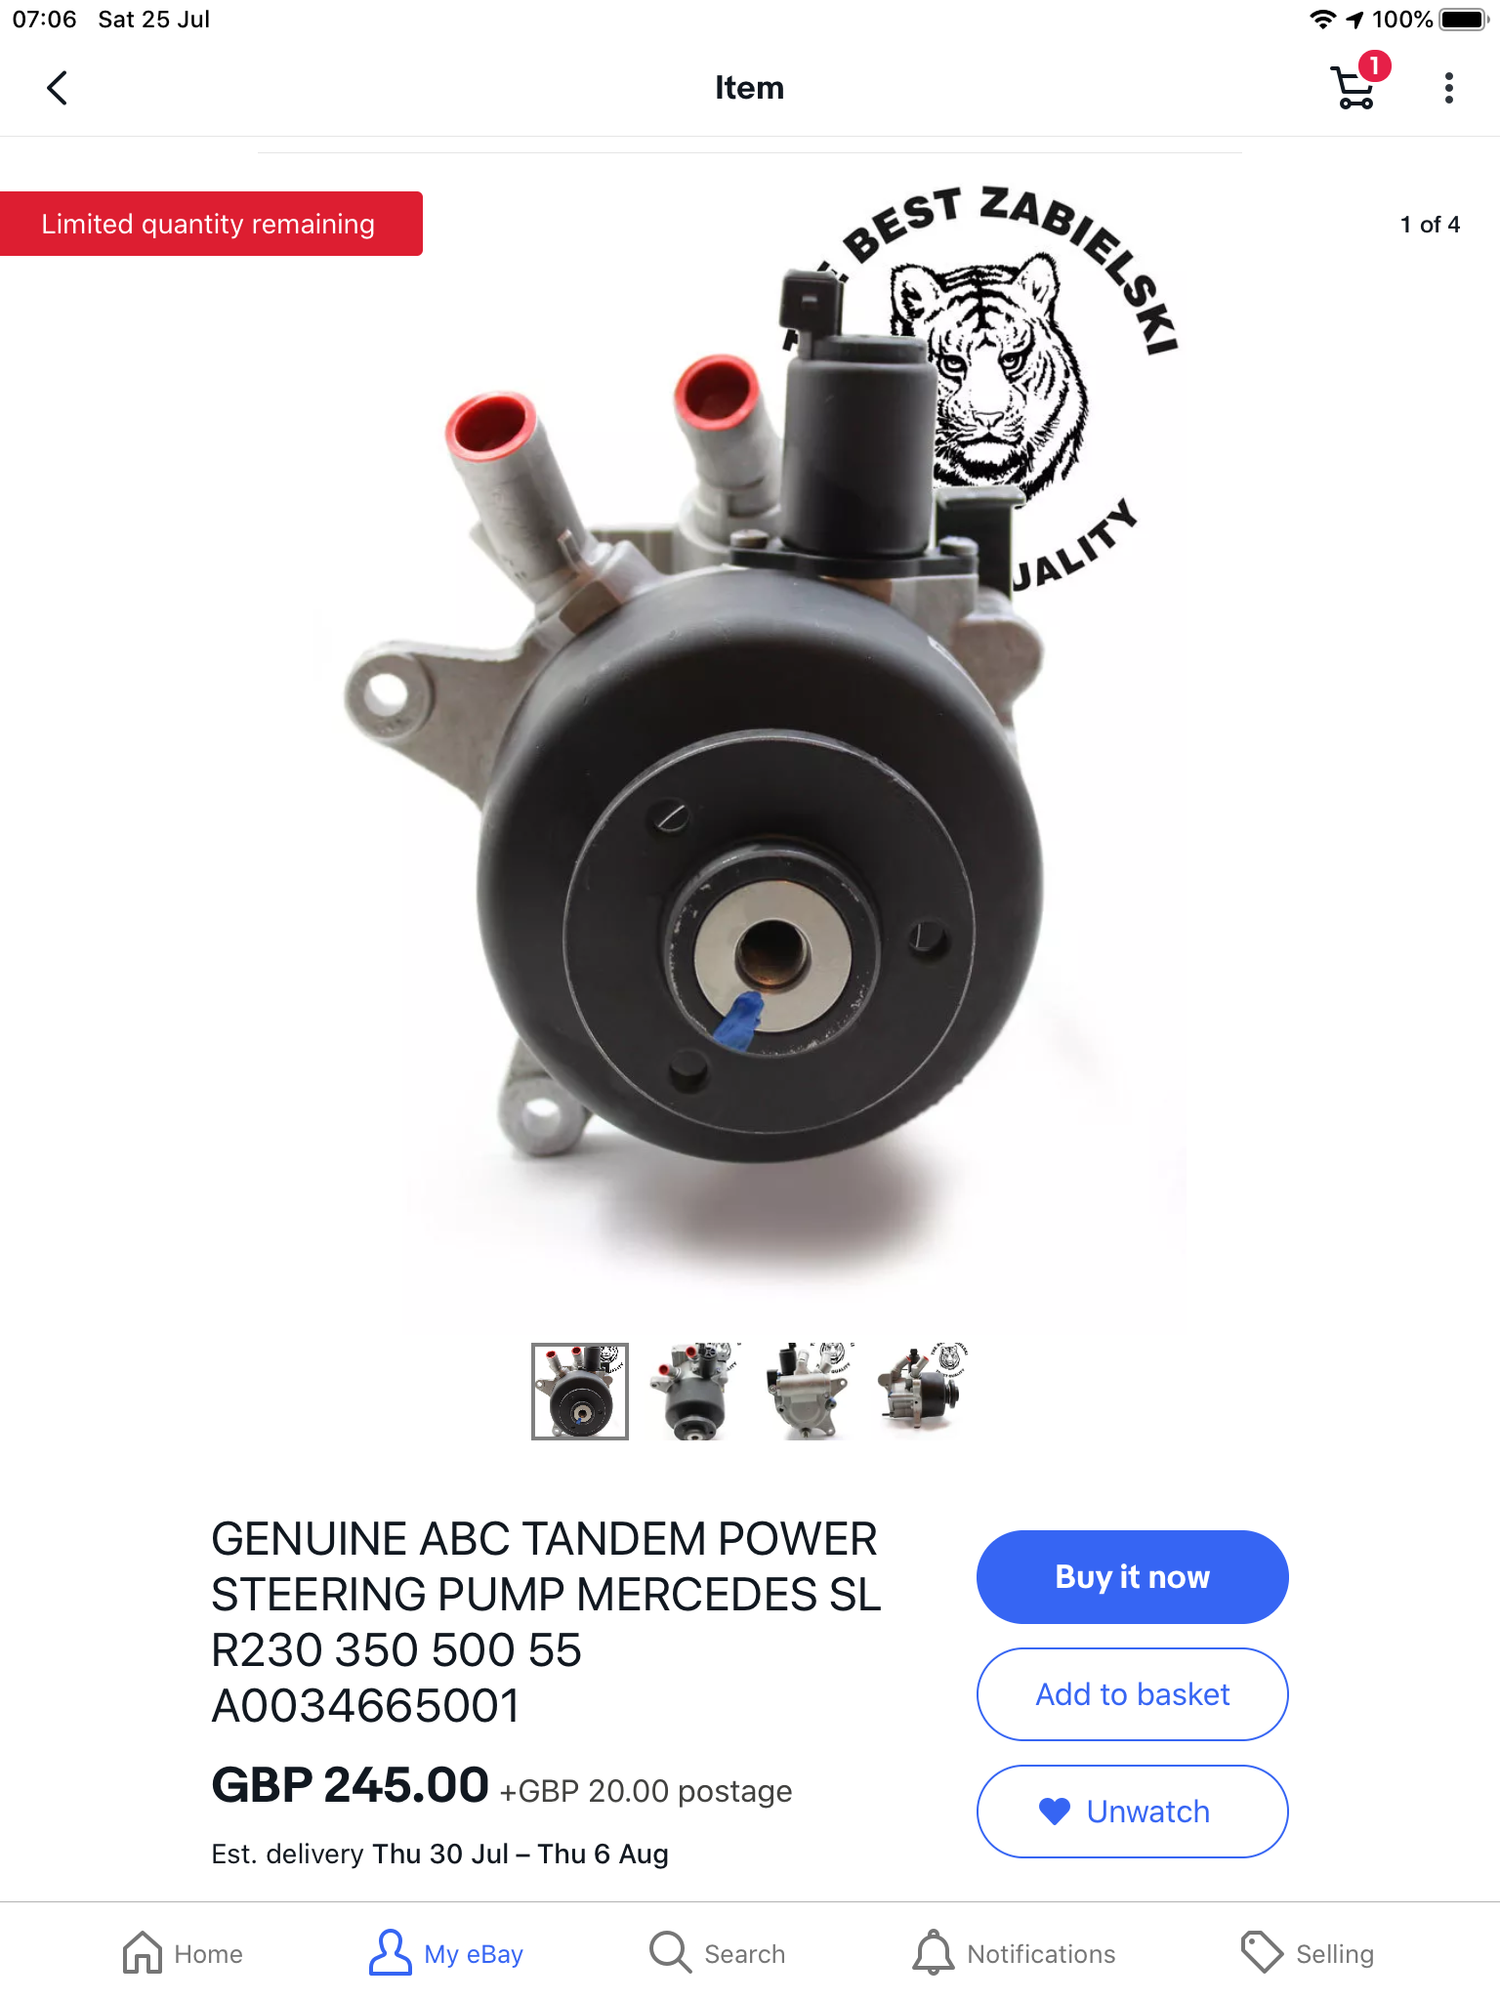 Buying Mercedes spare parts. Reliable and cheap. - MBWorld.org Forums